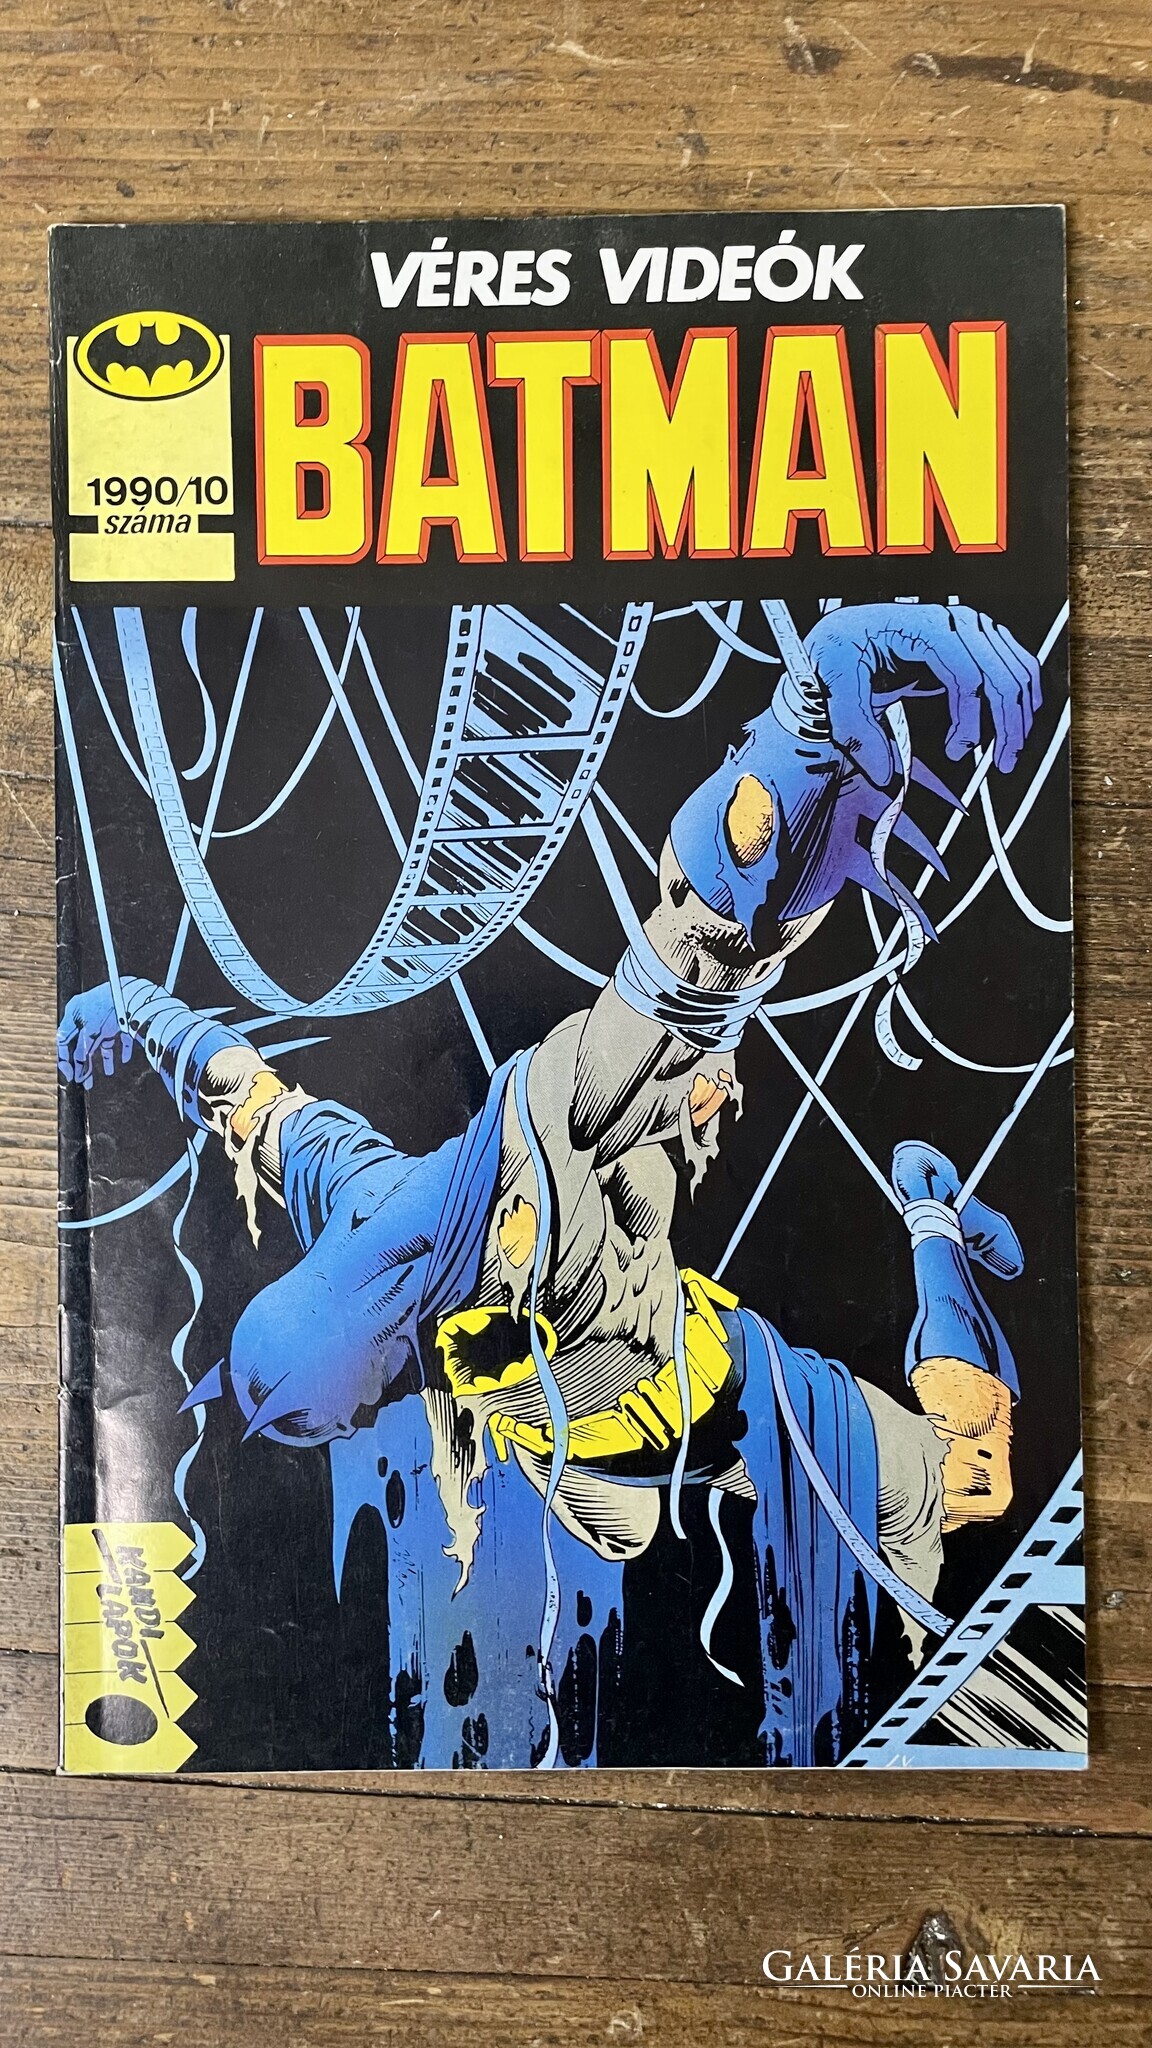 Batman bloody videos comic 1990/10 - Books | Galeria Savaria online  marketplace - Buy or sell on a credible, high quality platform.